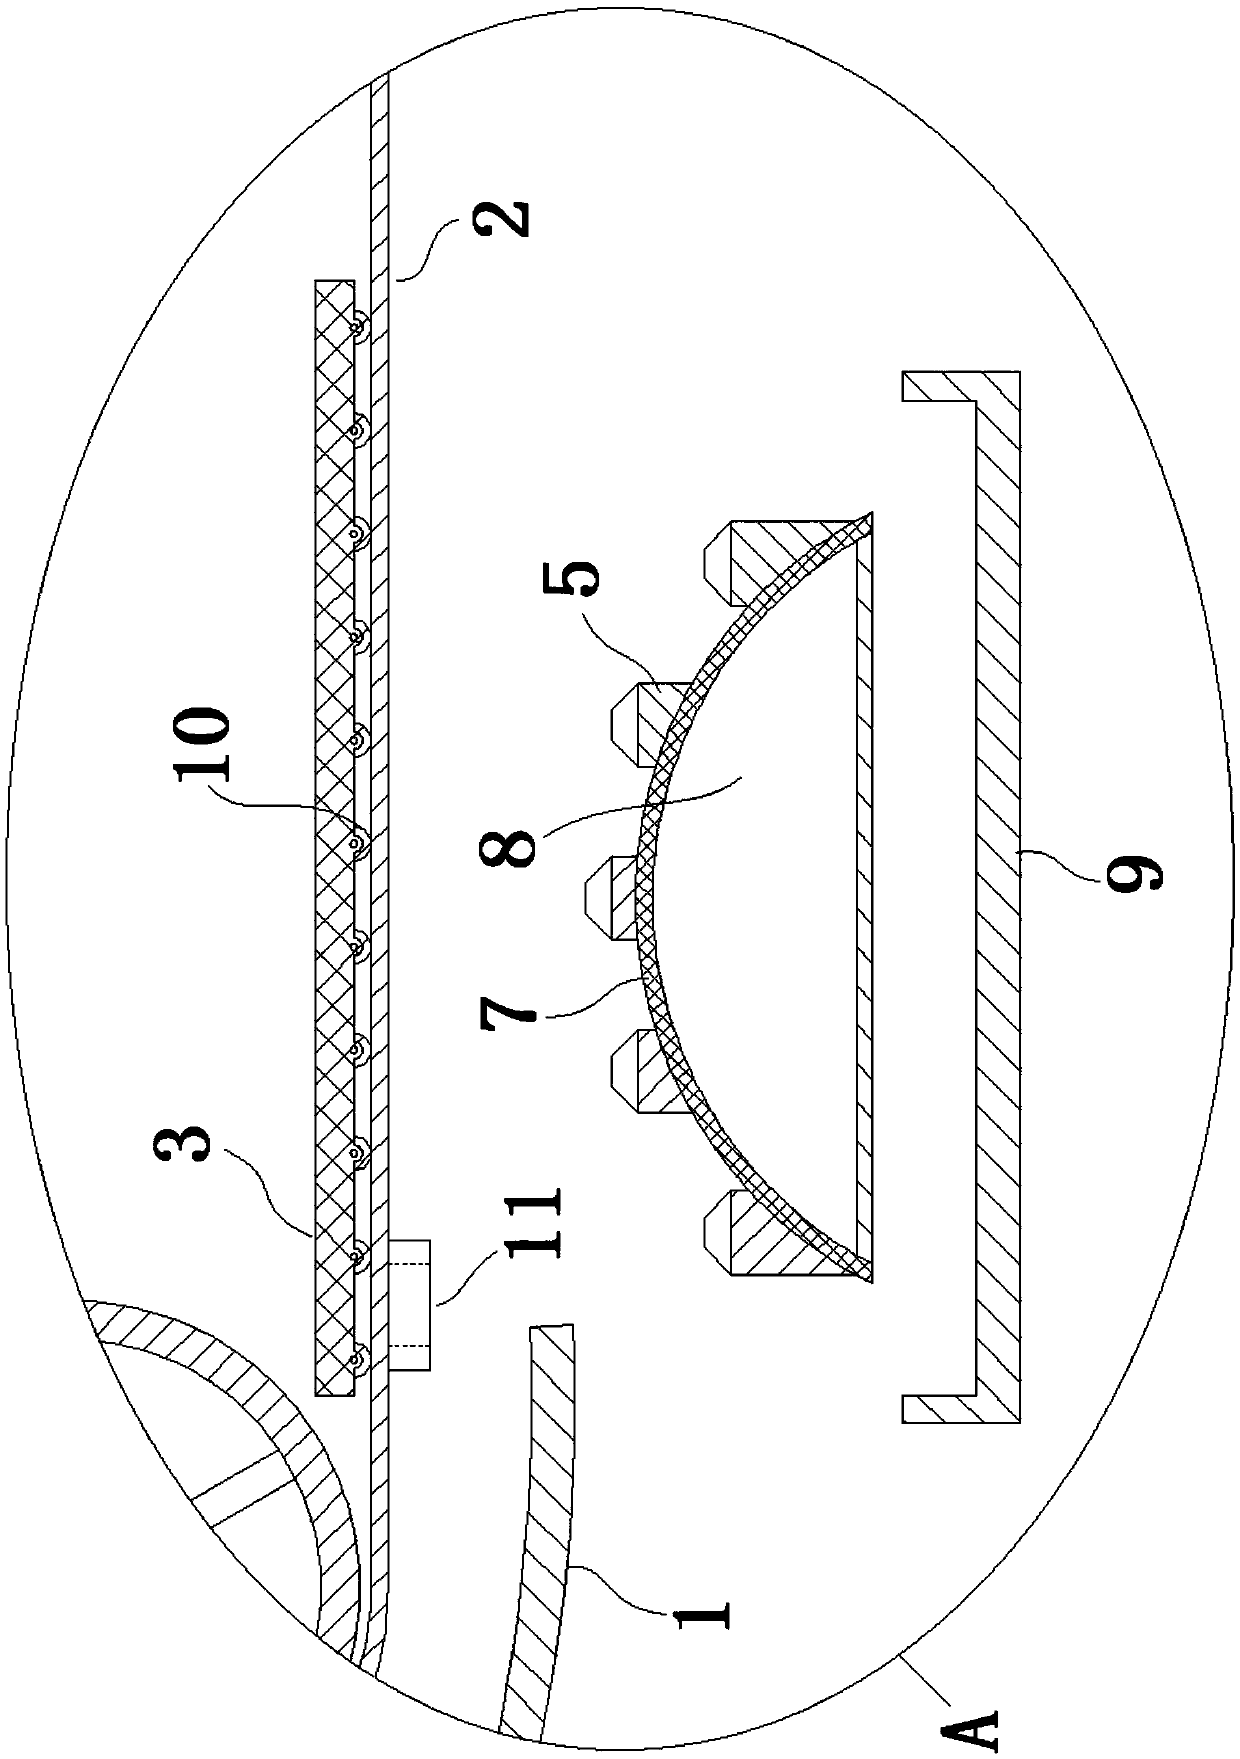 Bearing workpiece transfer device based on multi-directional cleaning